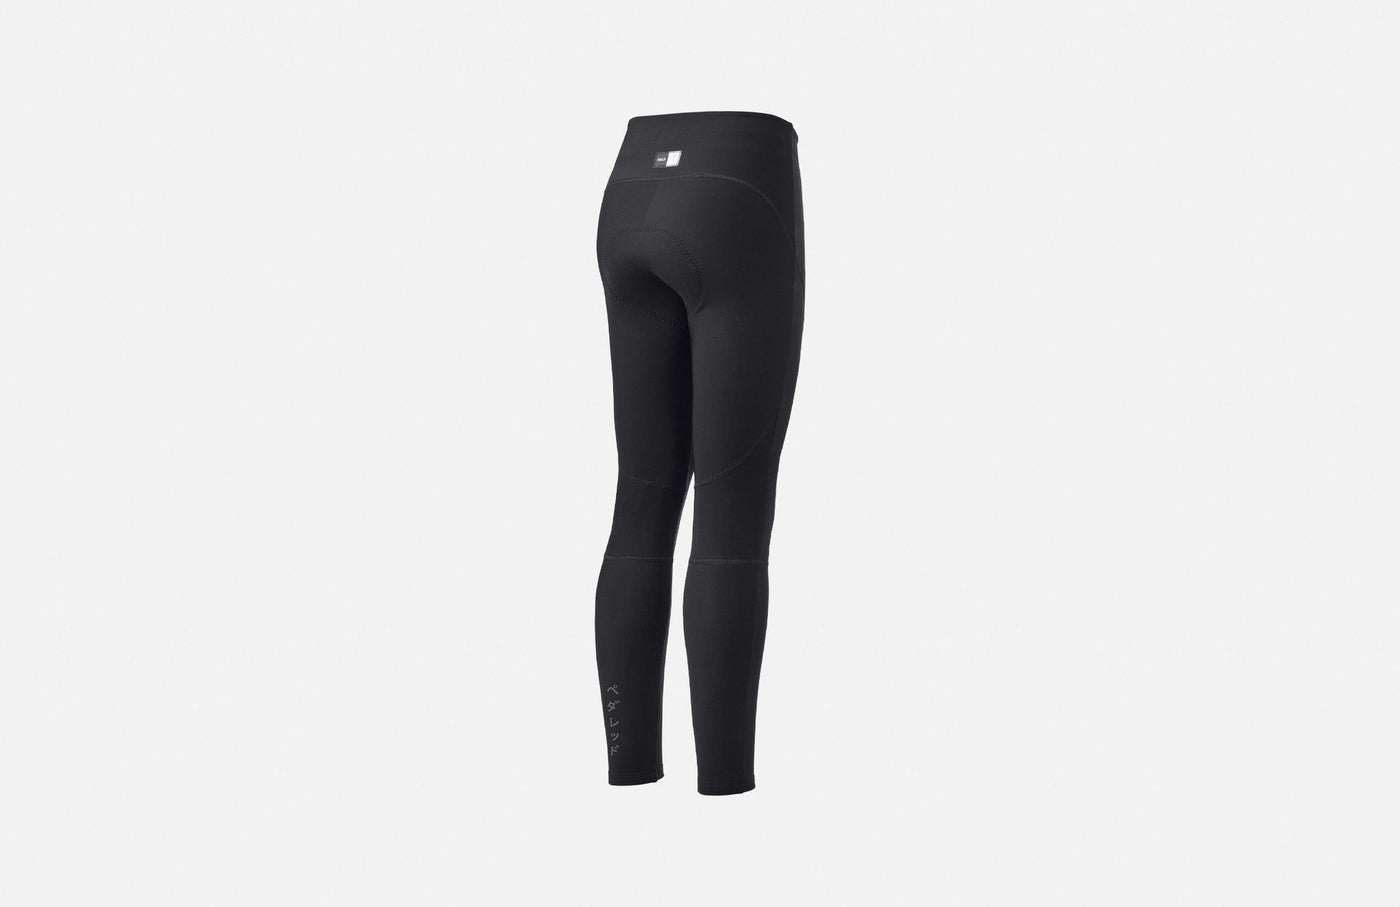 PEdALED Jary All-Road Insulated Padded Tights Black FW21